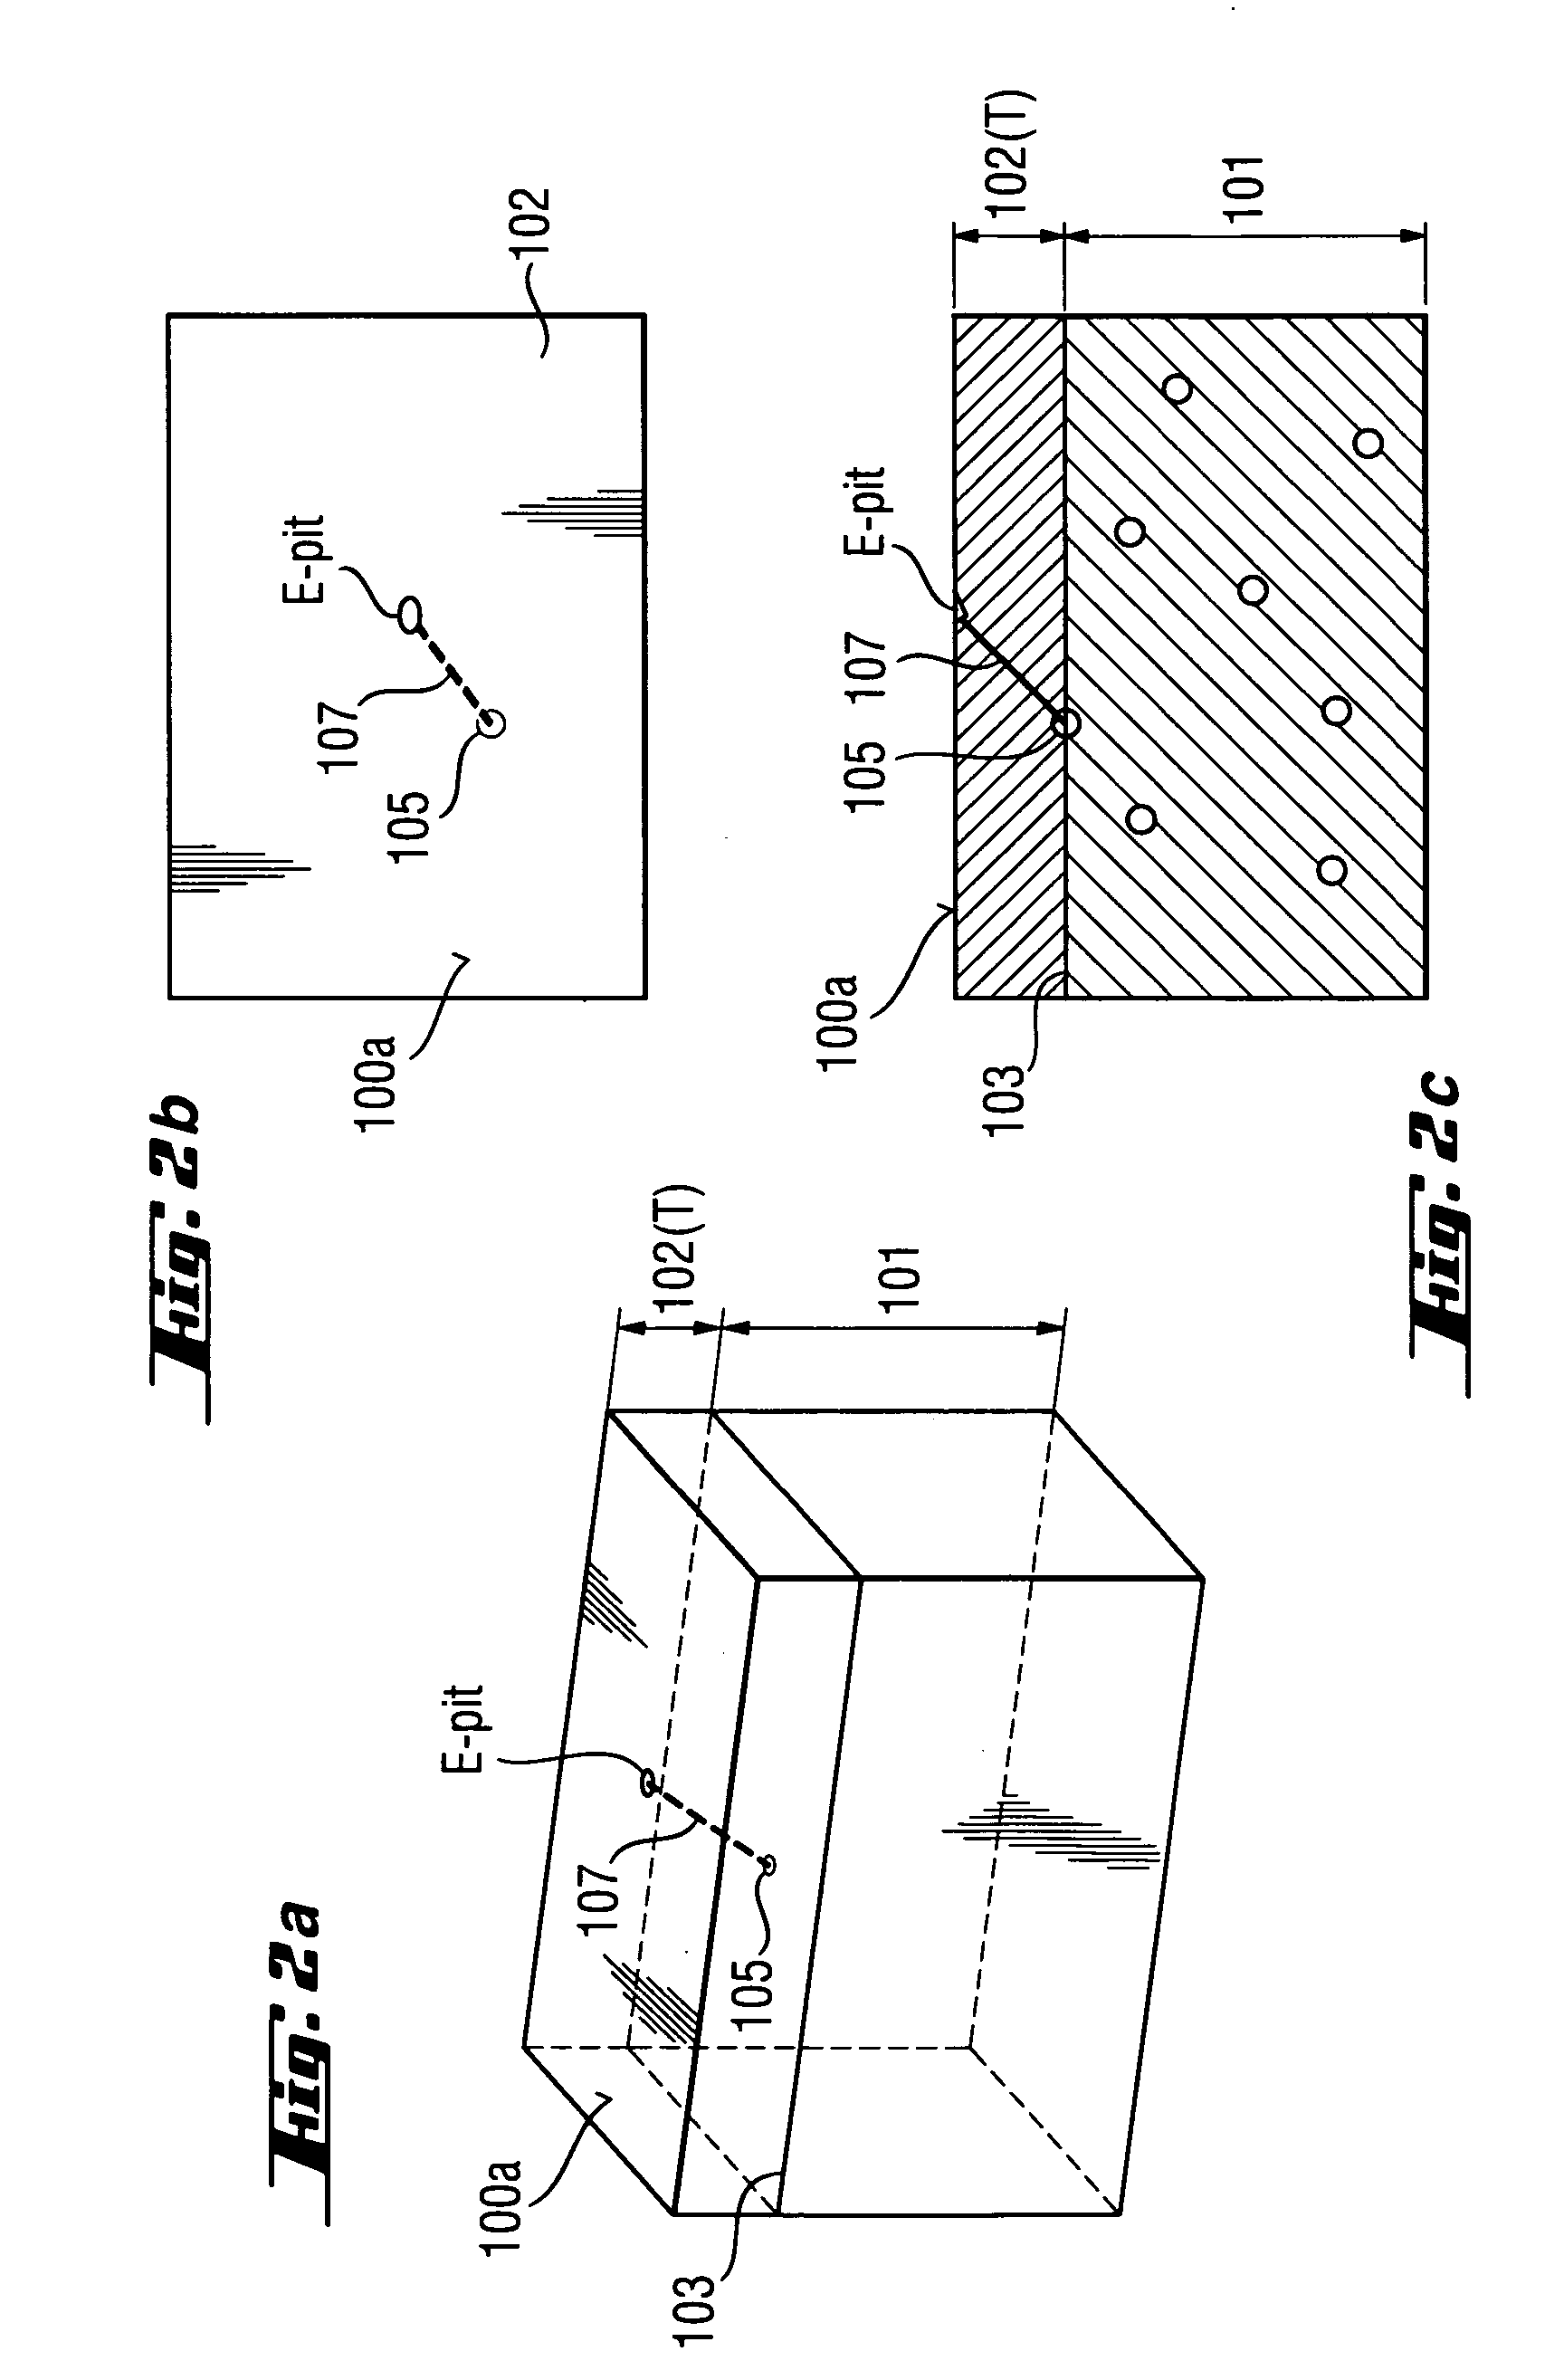 Epitaxial wafer and method for producing epitaxial wafers